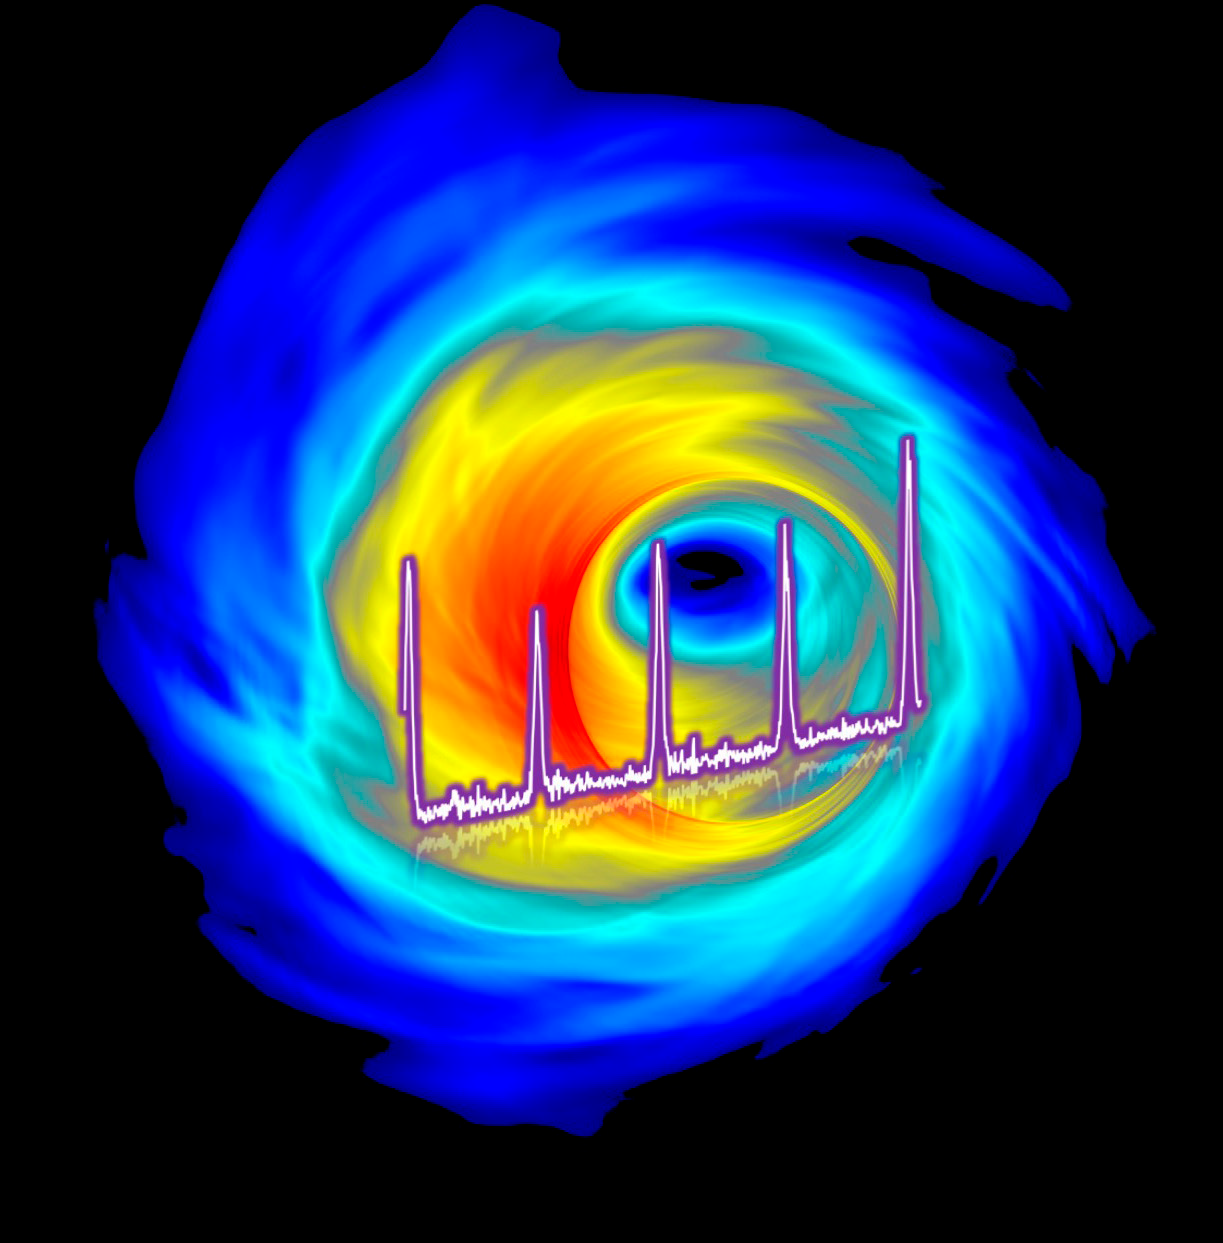 The background image is a numerical simulation of hot plasma swirling around an accreting black hole